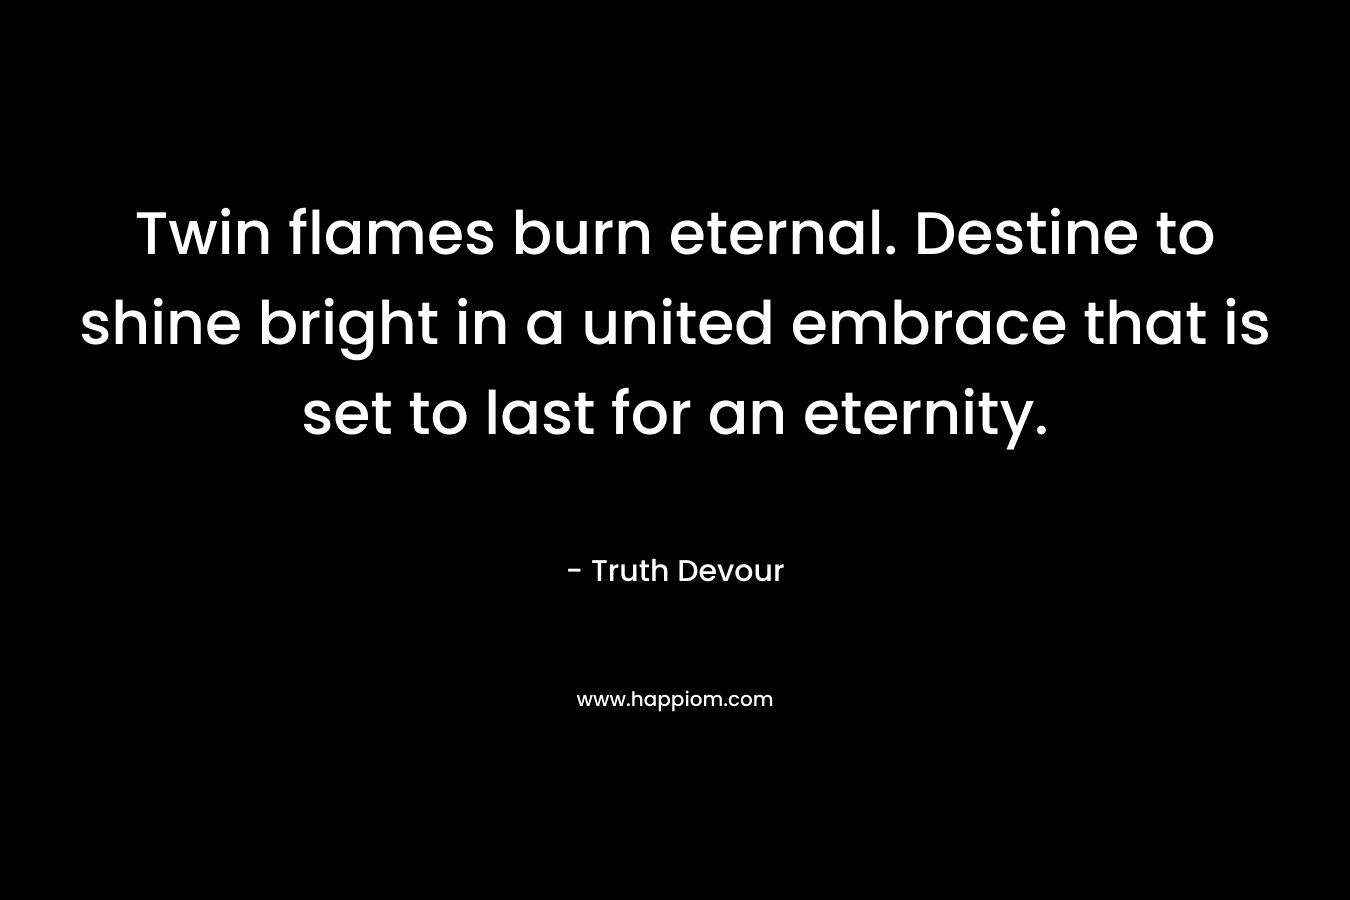 Twin flames burn eternal. Destine to shine bright in a united embrace that is set to last for an eternity.